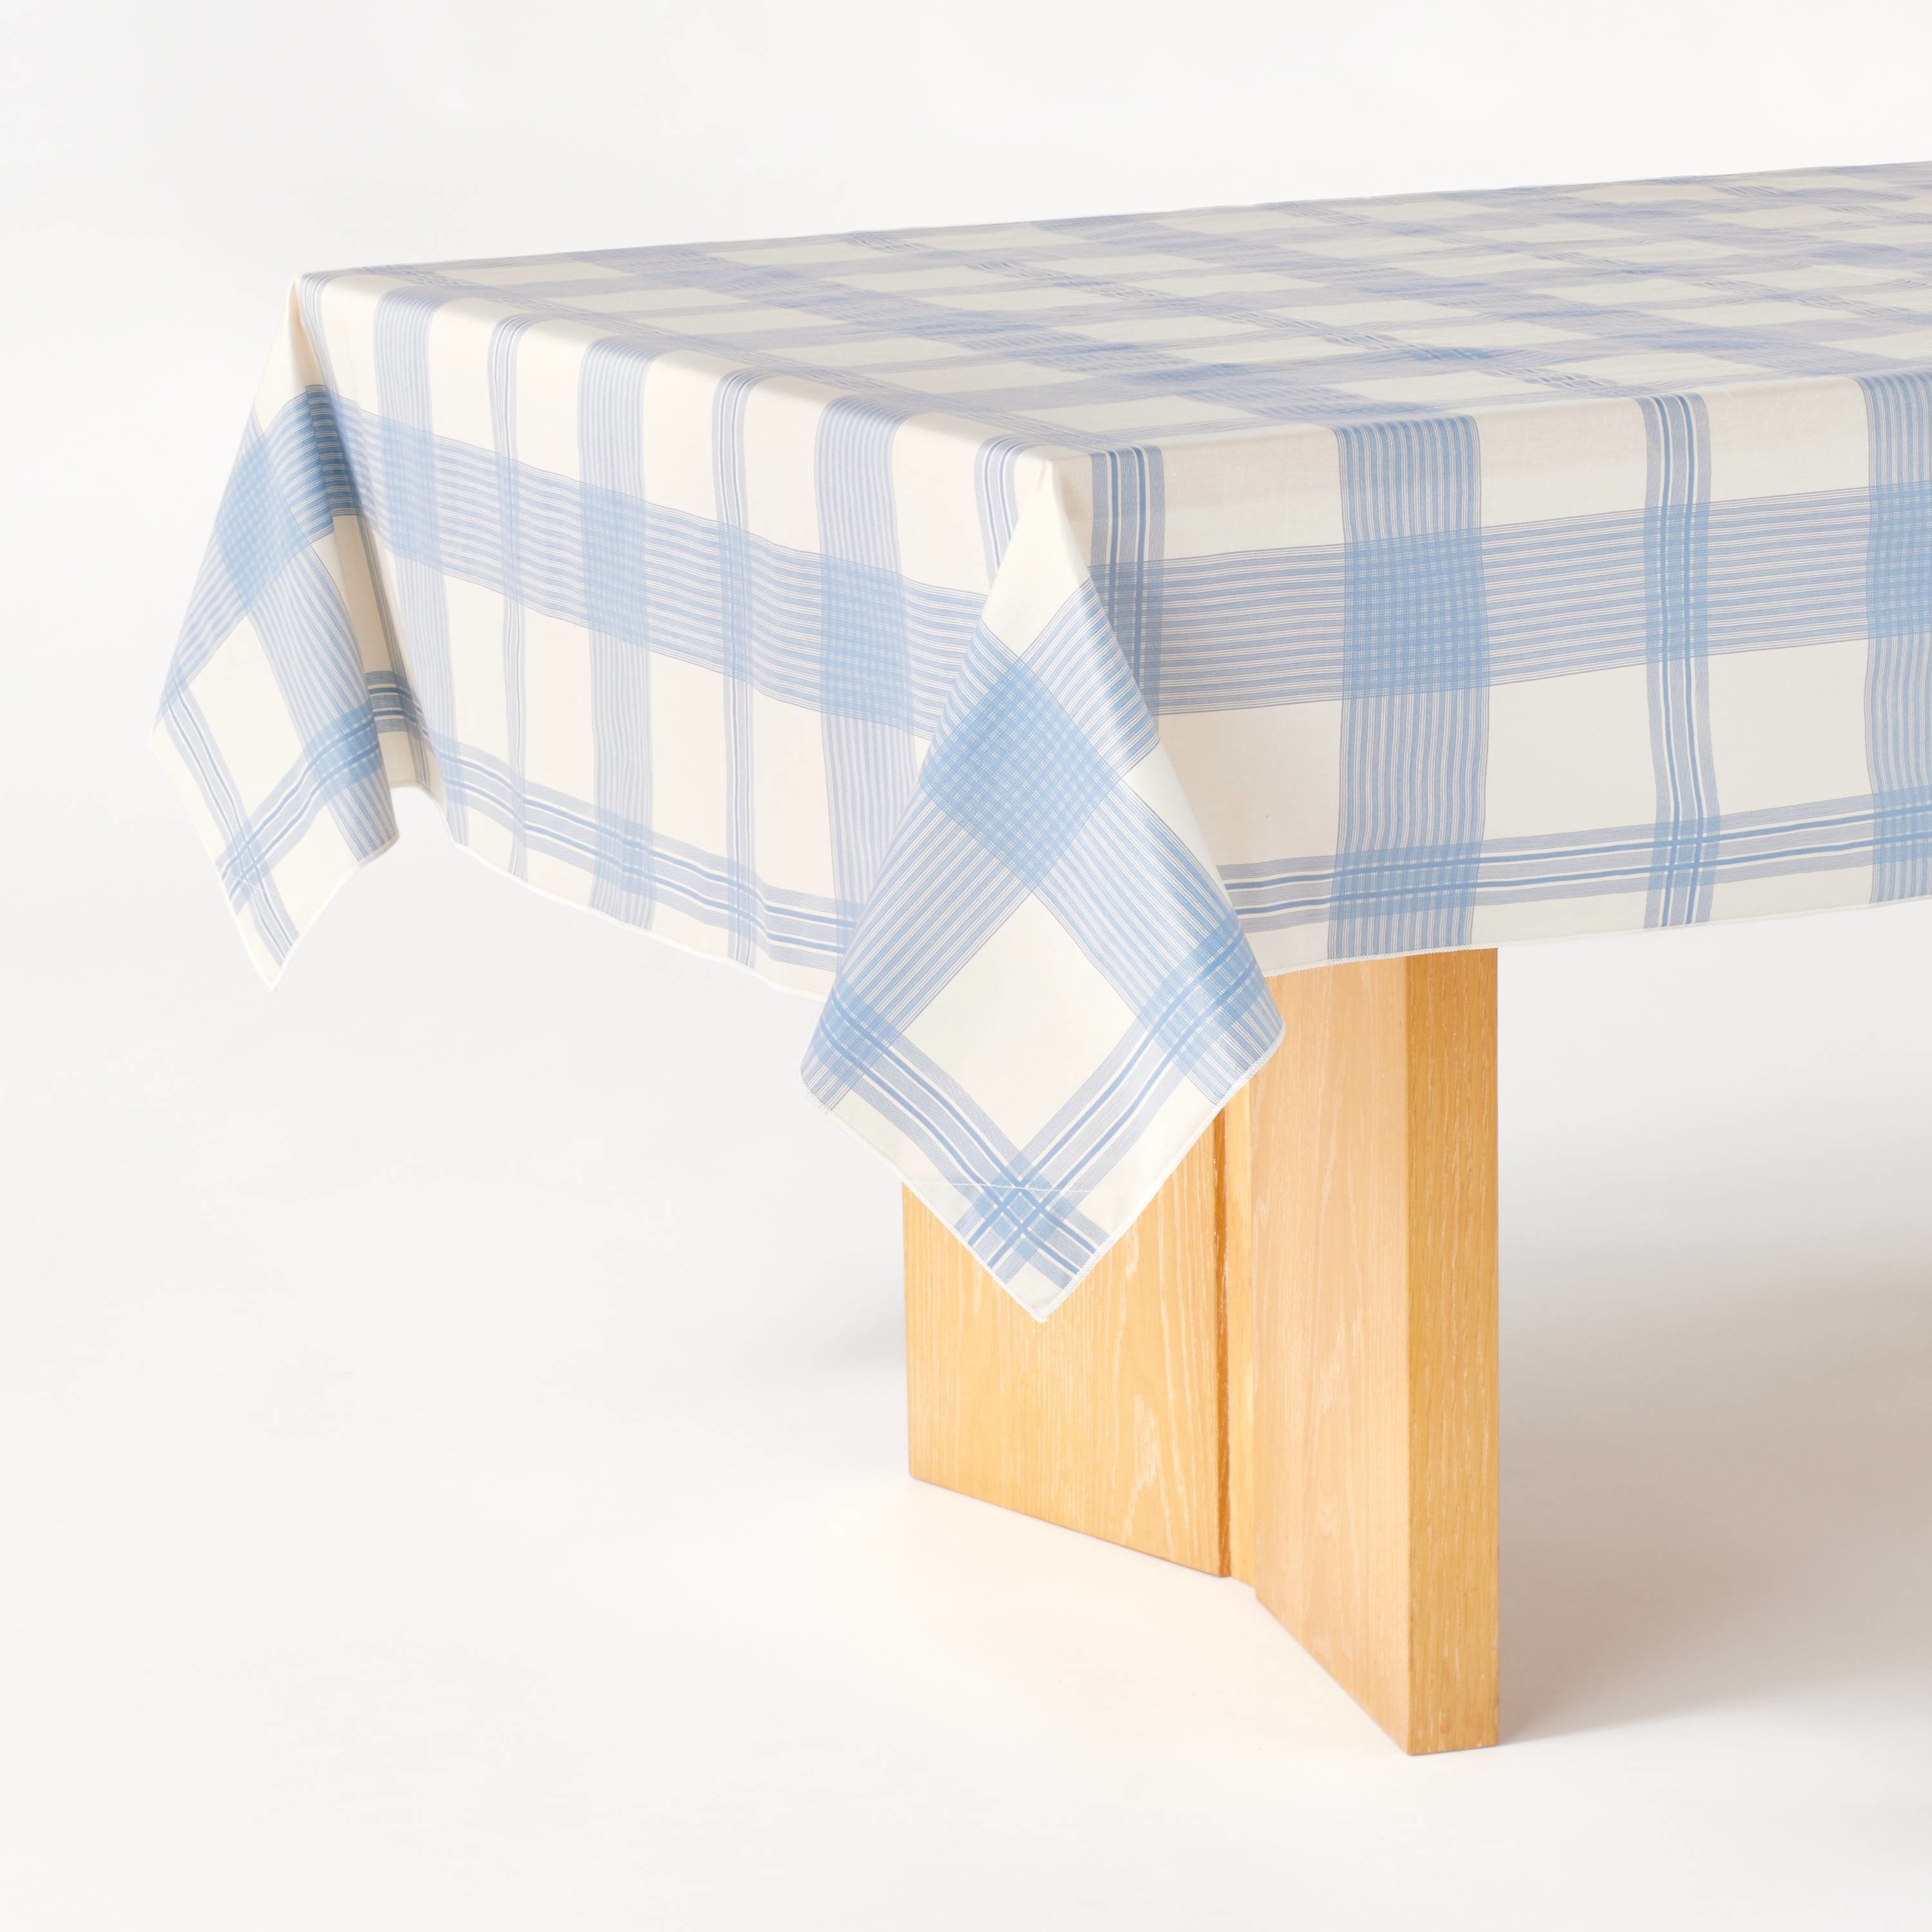 A corner of a wooden table with a blue and white checkered tablecloth hanging off the edge